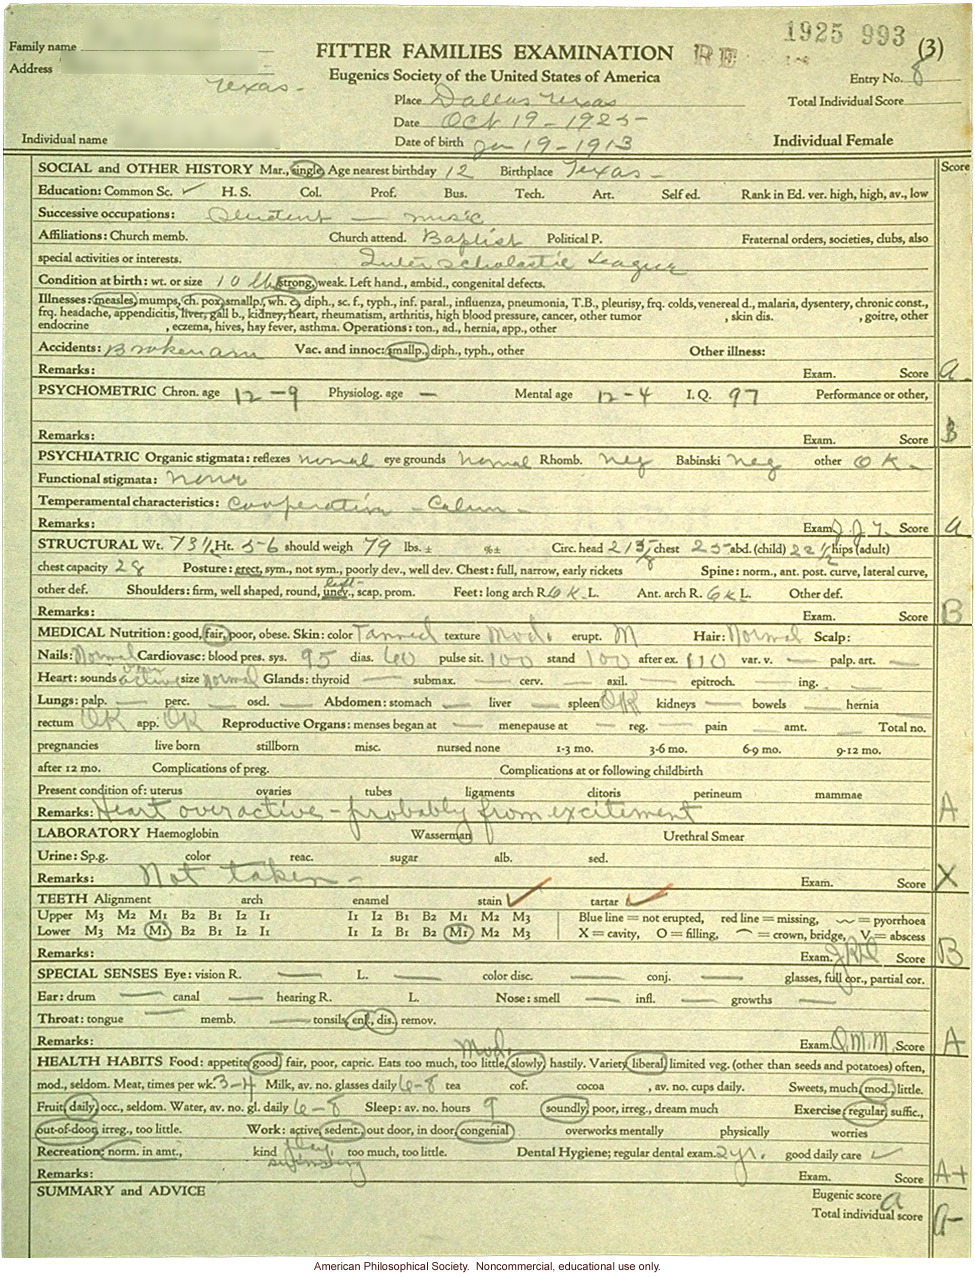 &quote;Large family&quote; winner, Fitter Families Contest, Texas State Fair (1925): individual examinations